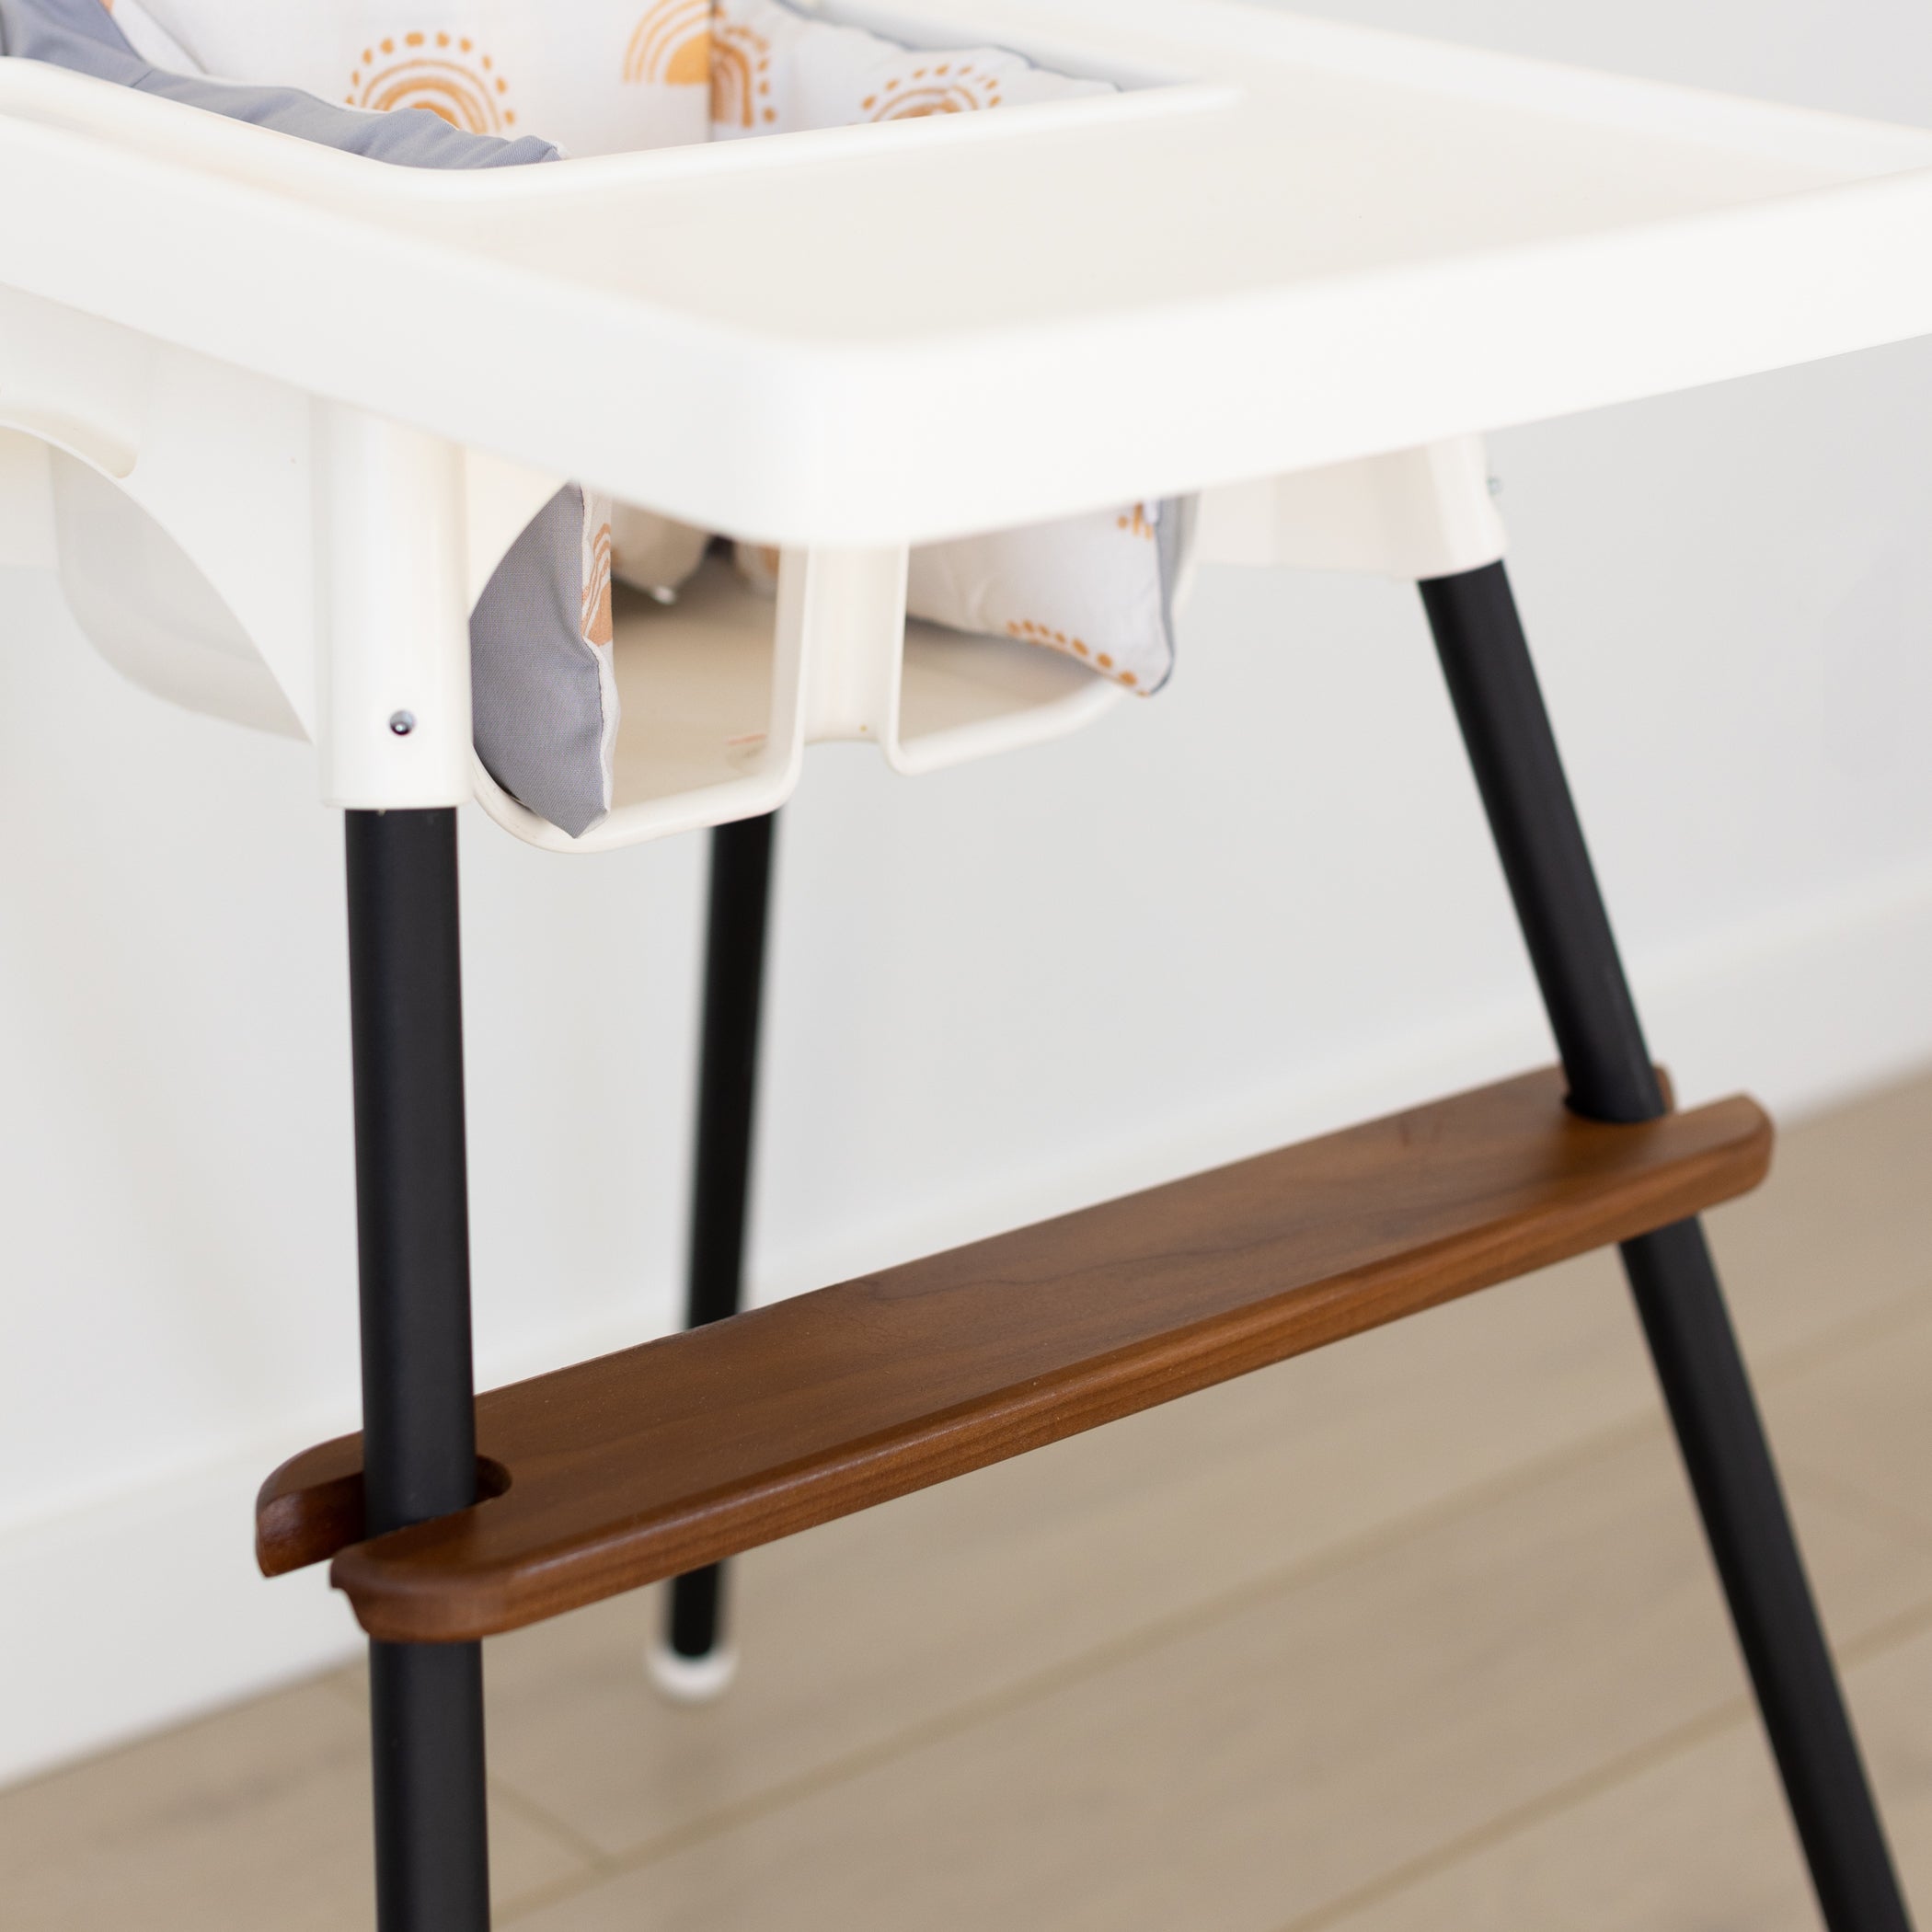 High Chair Footrest Accessories Foot Rest adjustable for High Chair